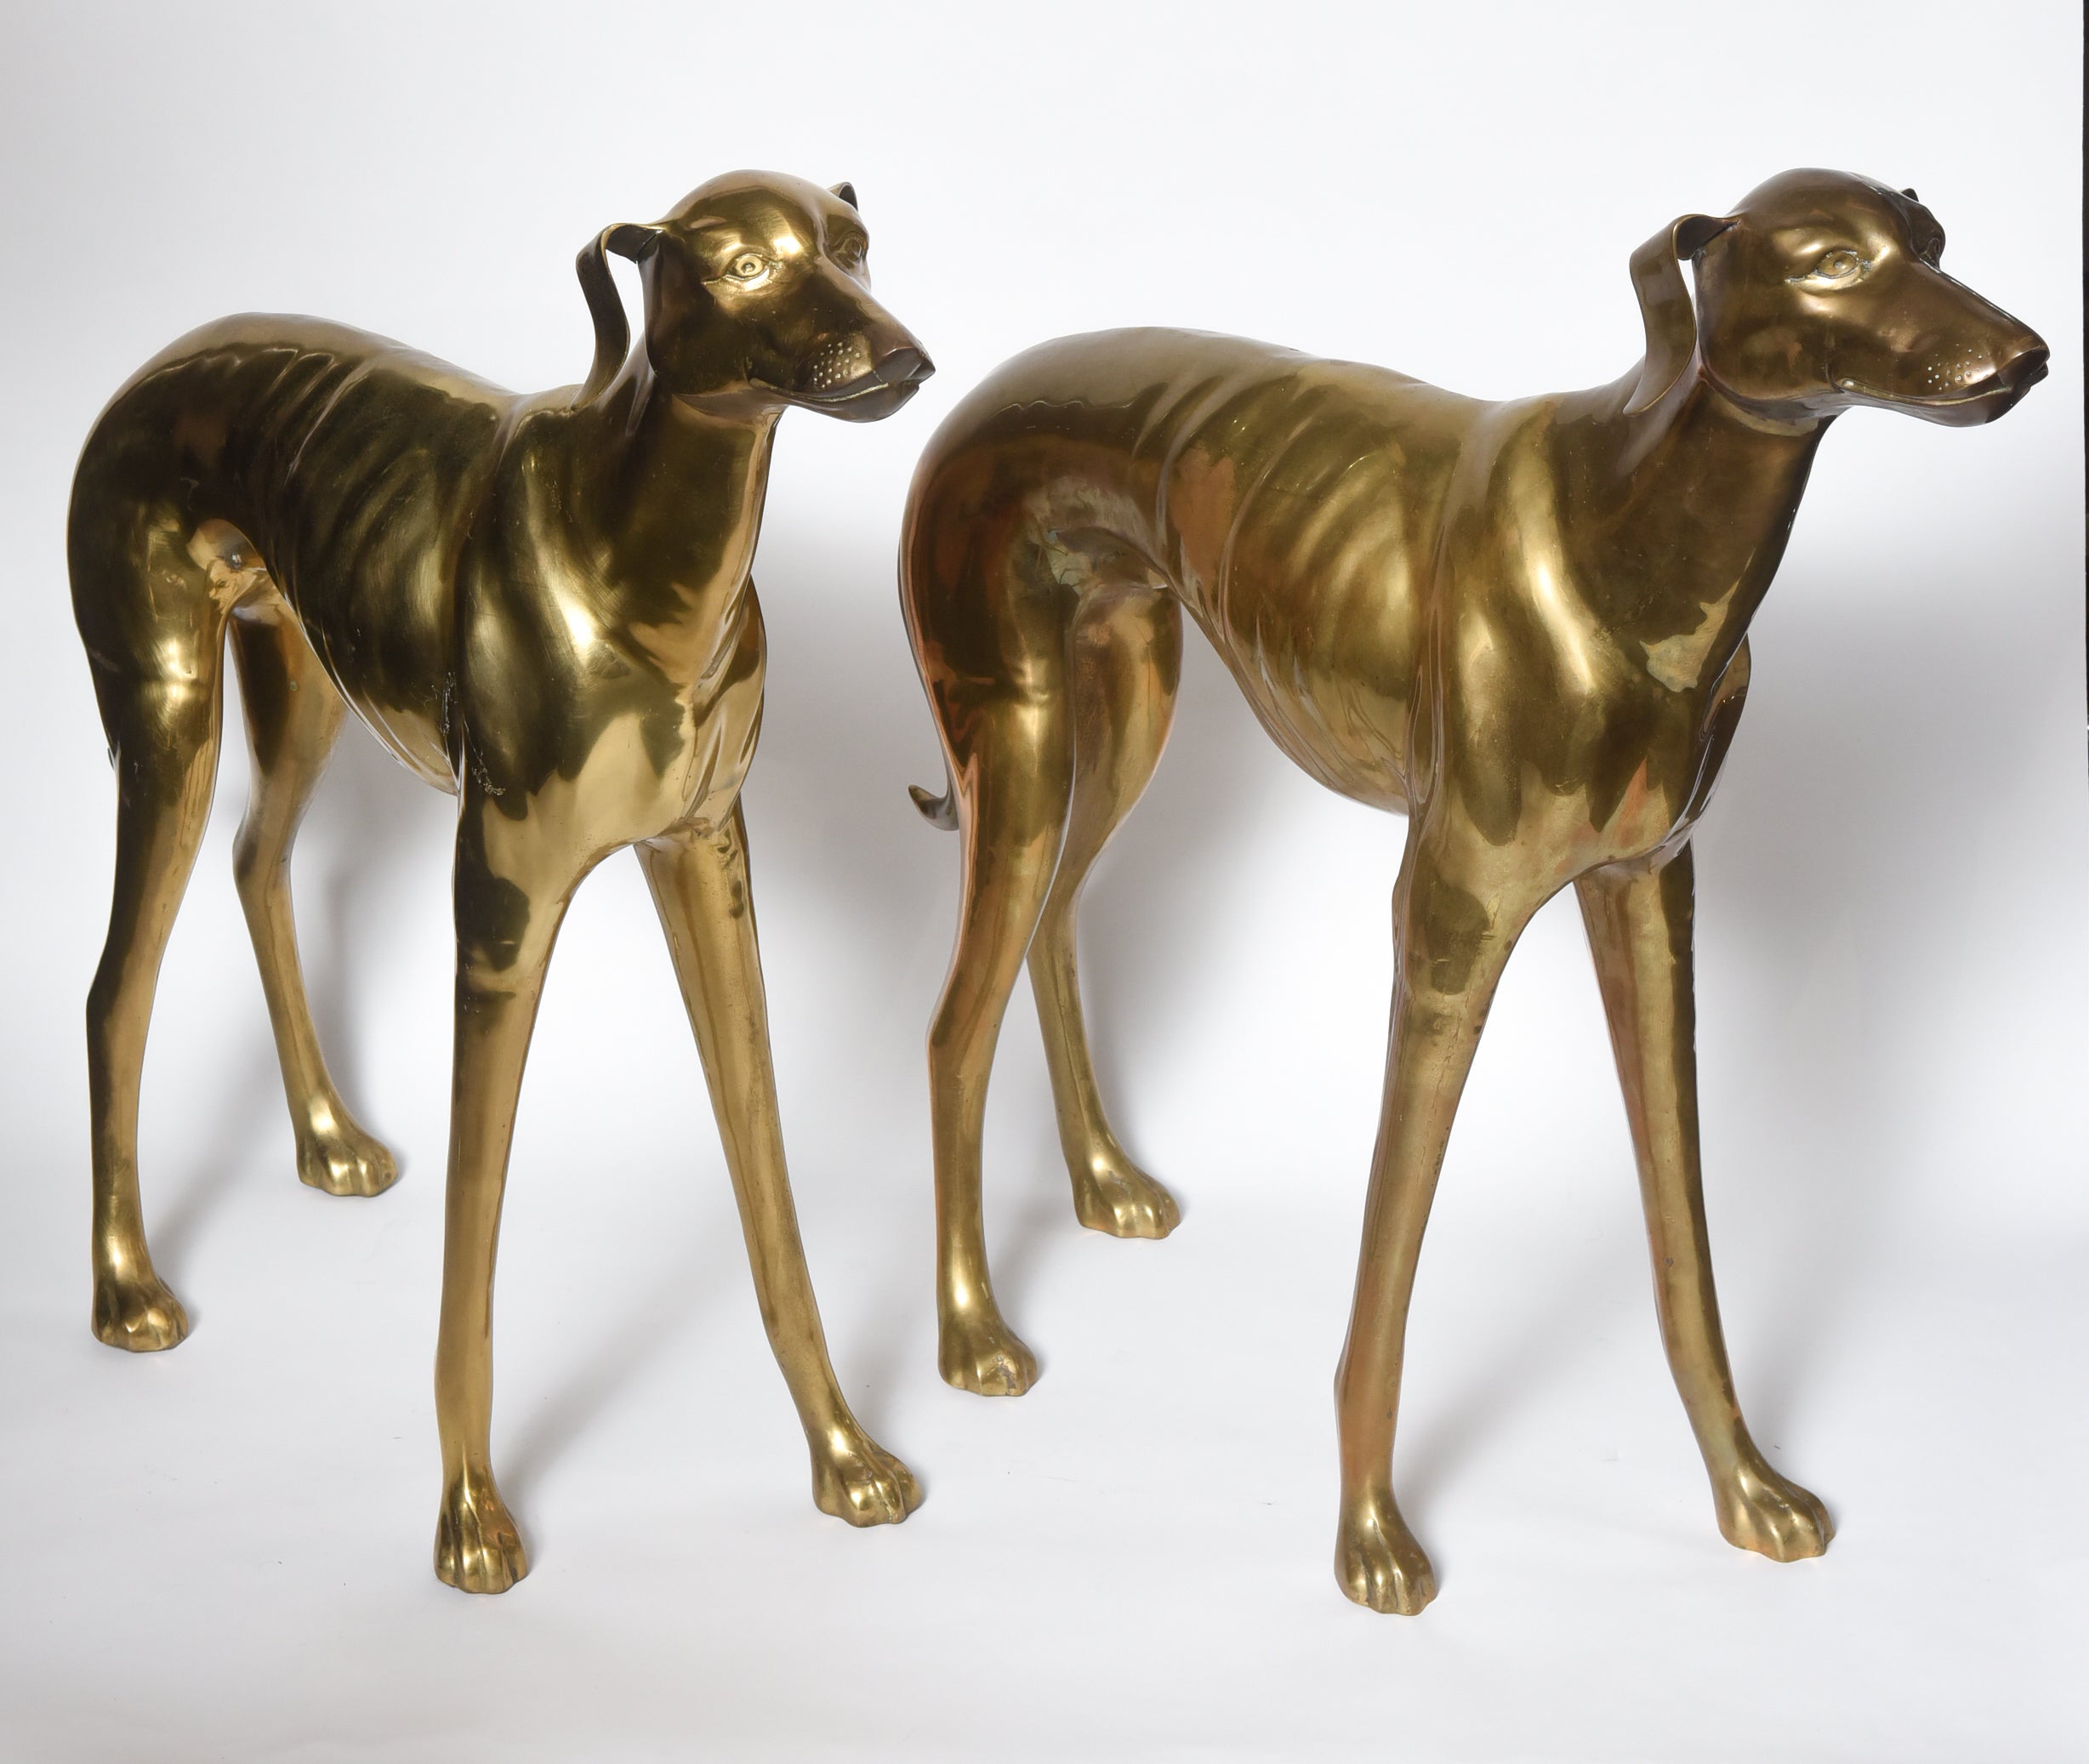 Pair of Midcentury Life-Size Brass Whippet Dogs